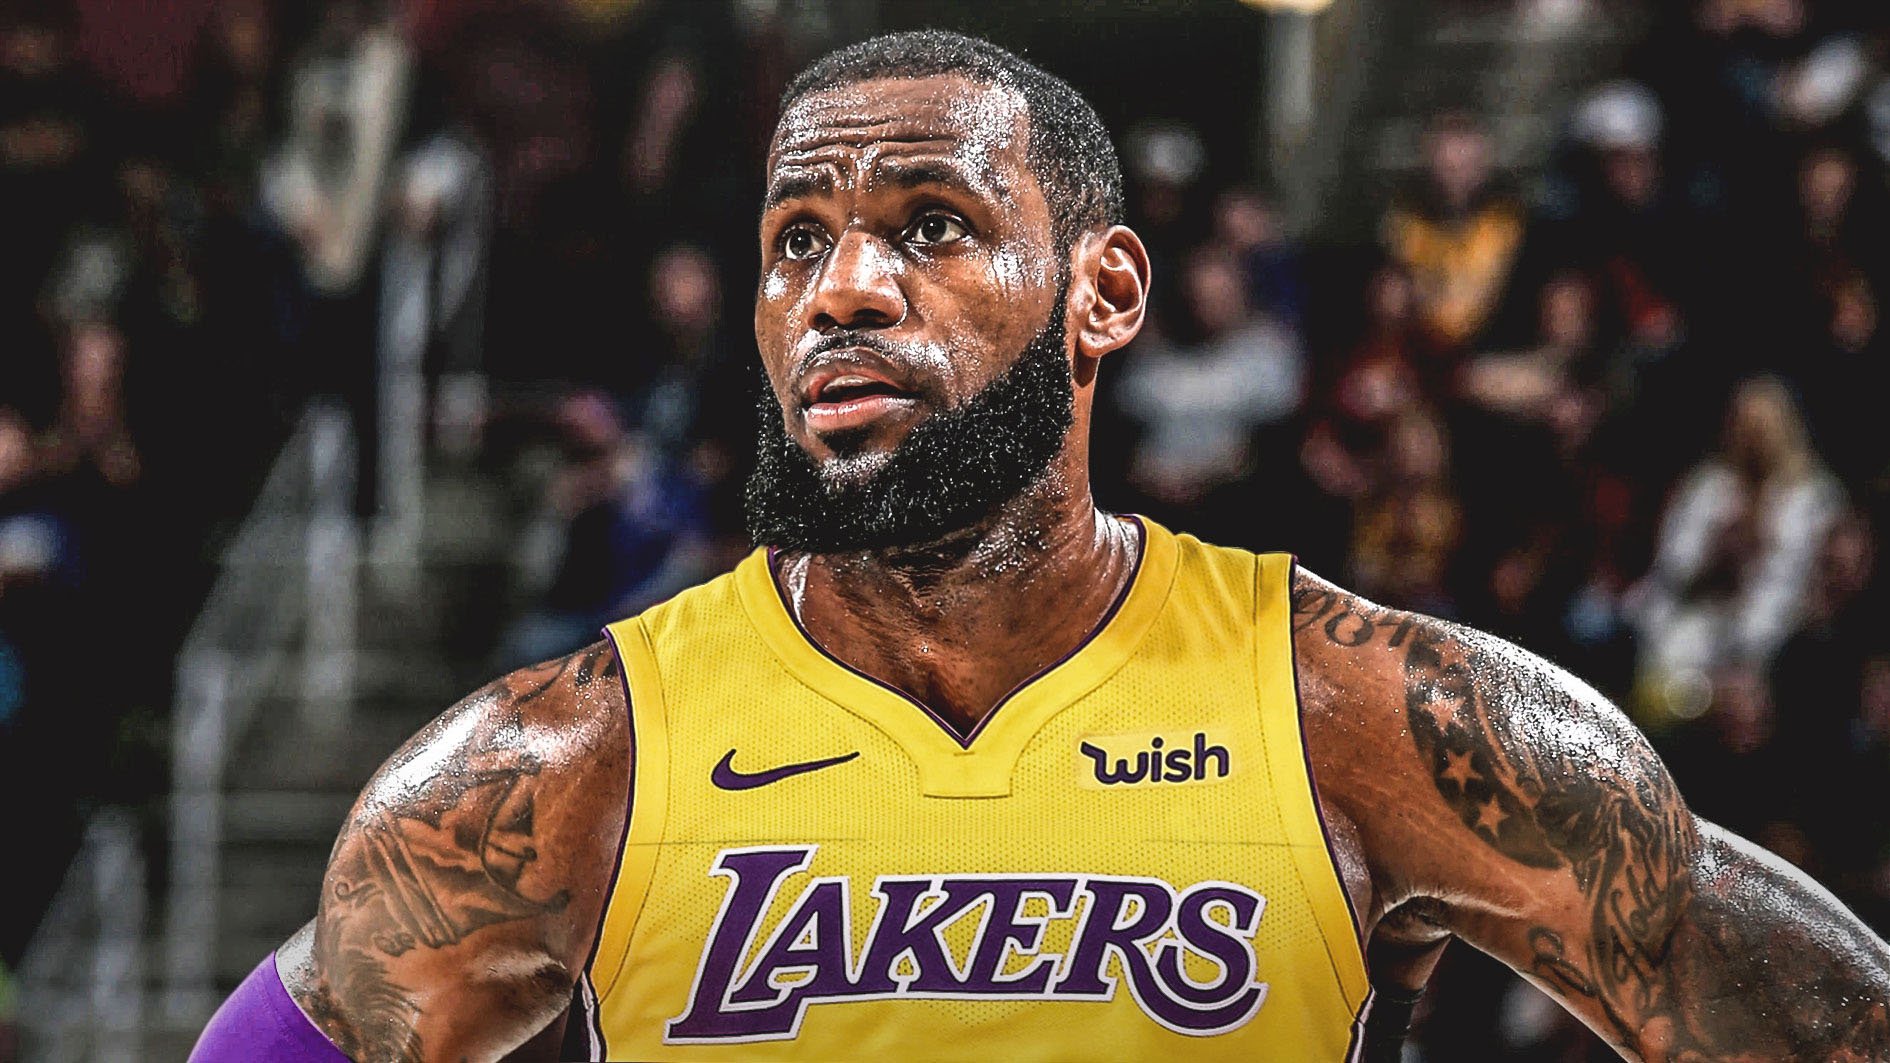 Los Angeles Lakers Ink Deal With LeBron James For A four-Year, $153.3 Million-HustleTV.tv-DJHustle